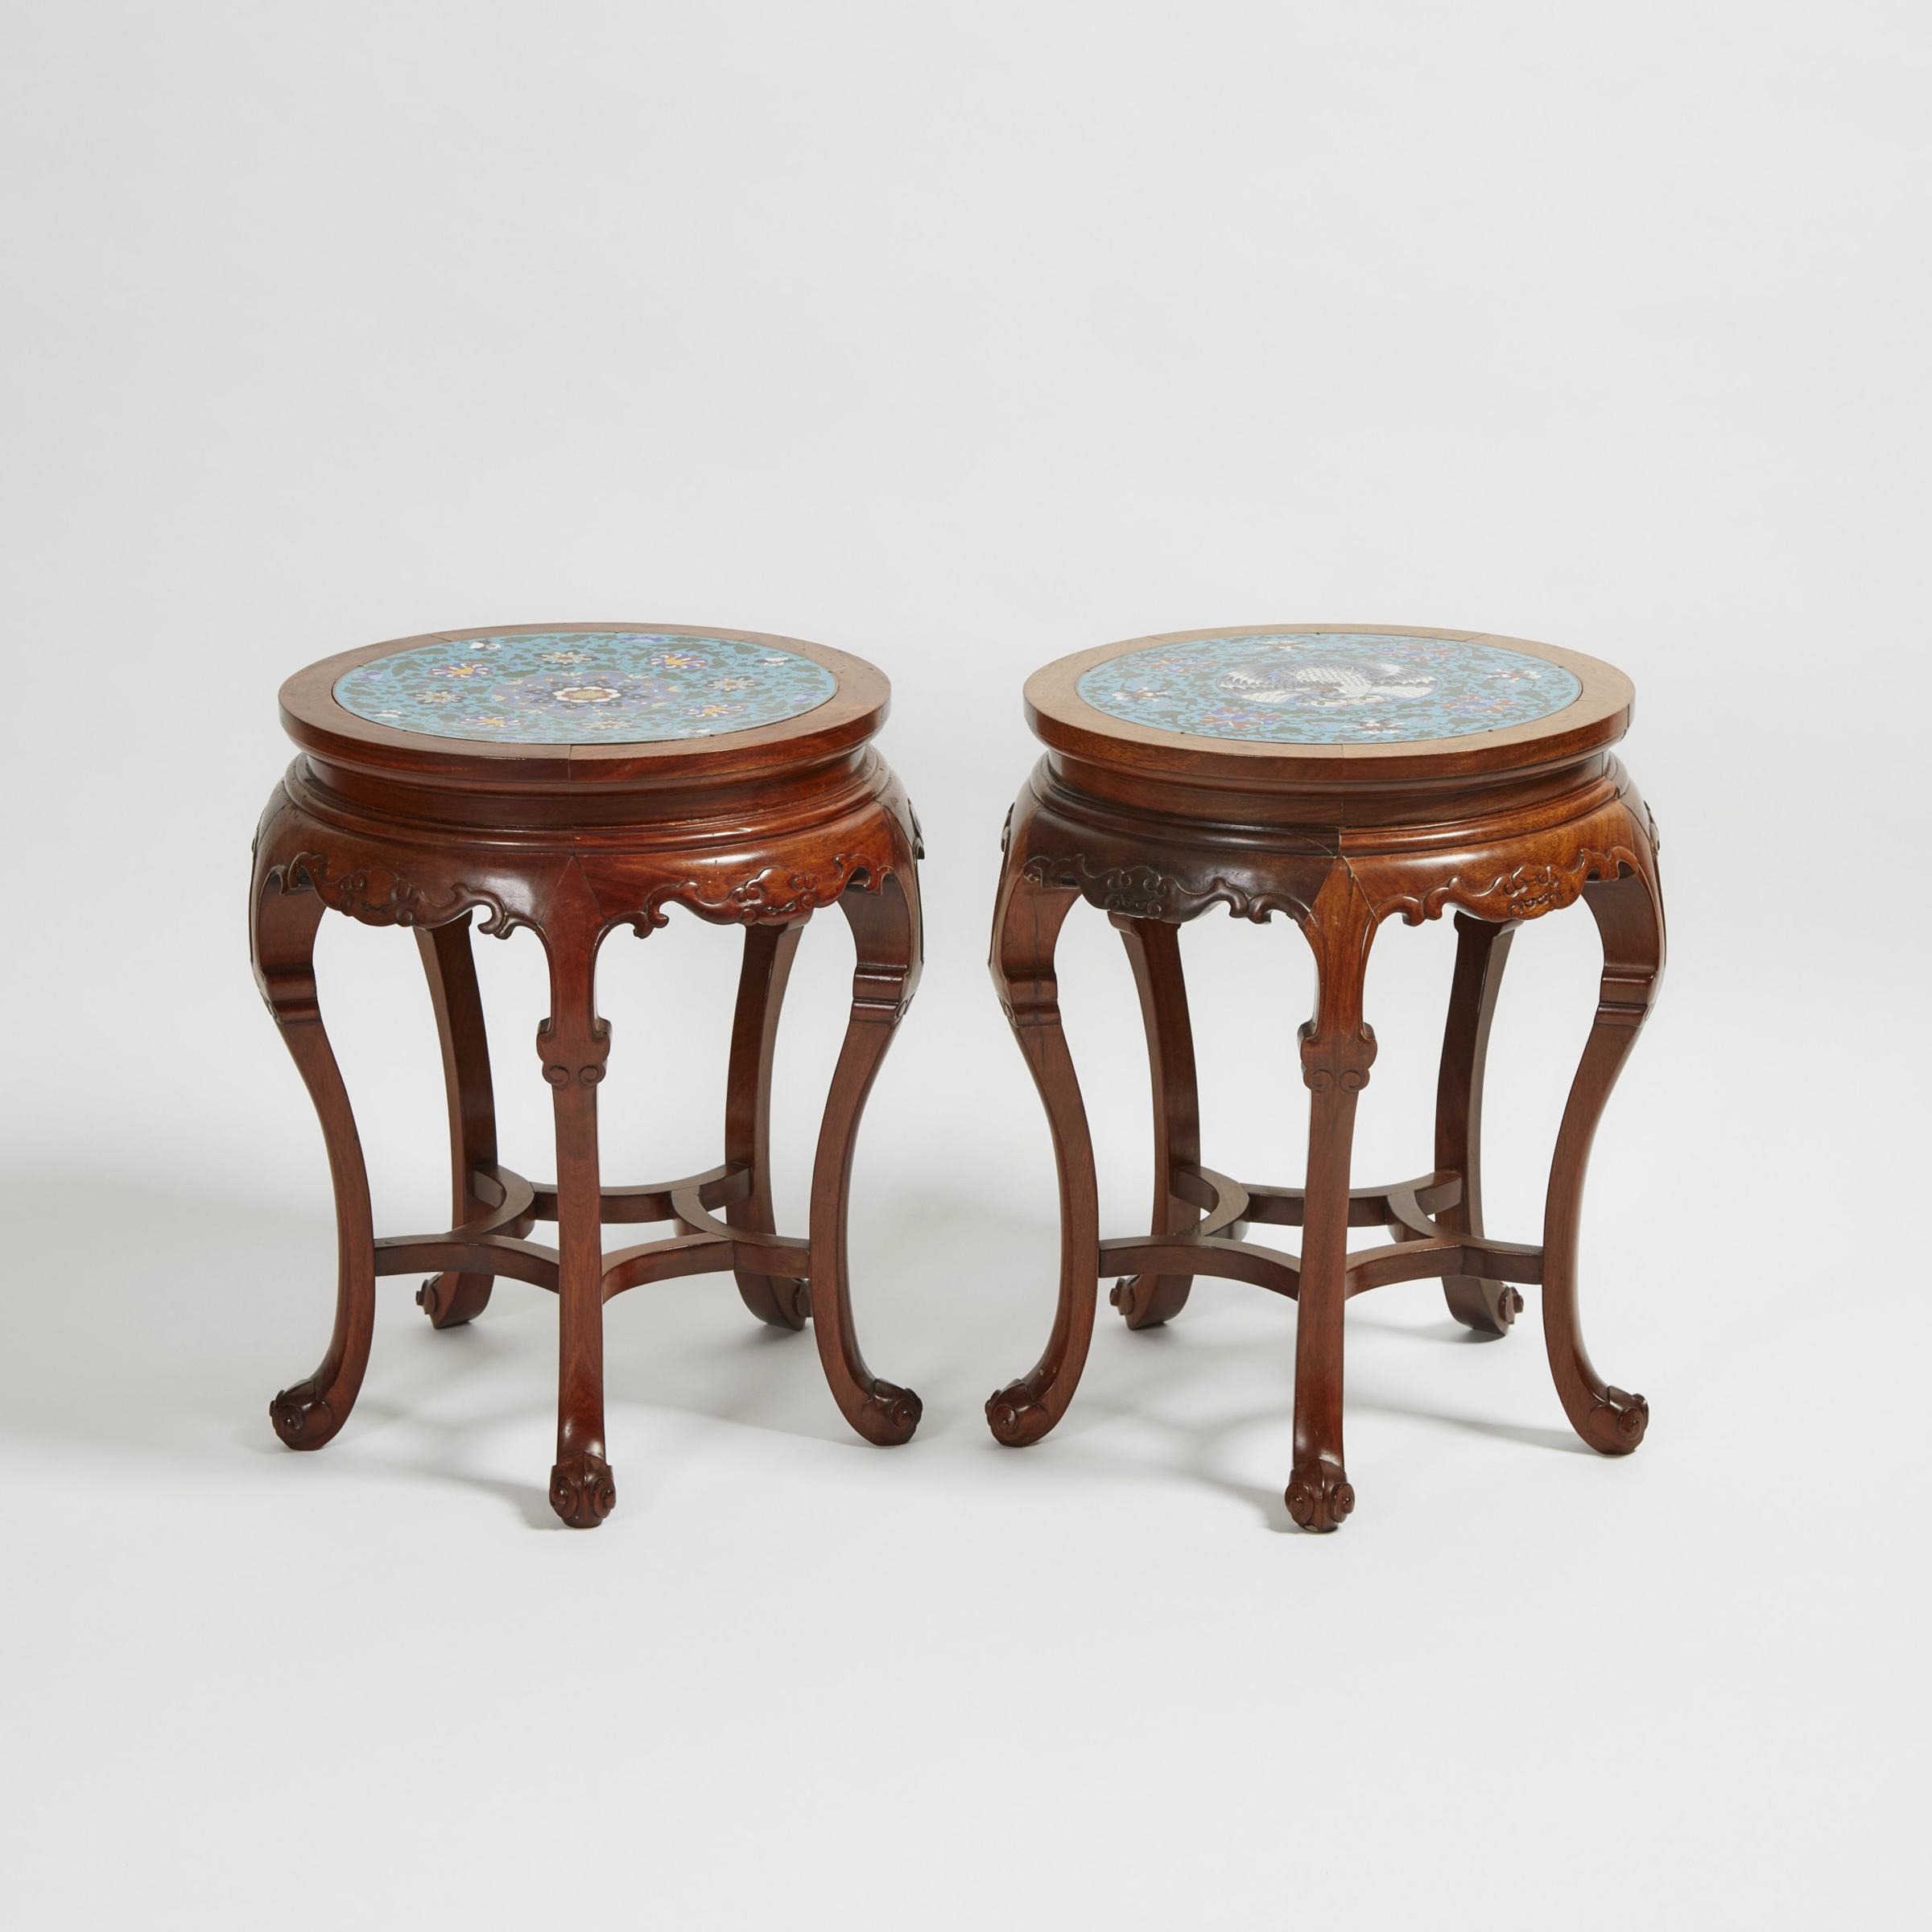 A Pair of Chinese Cloisonné Top Hardwood Stools